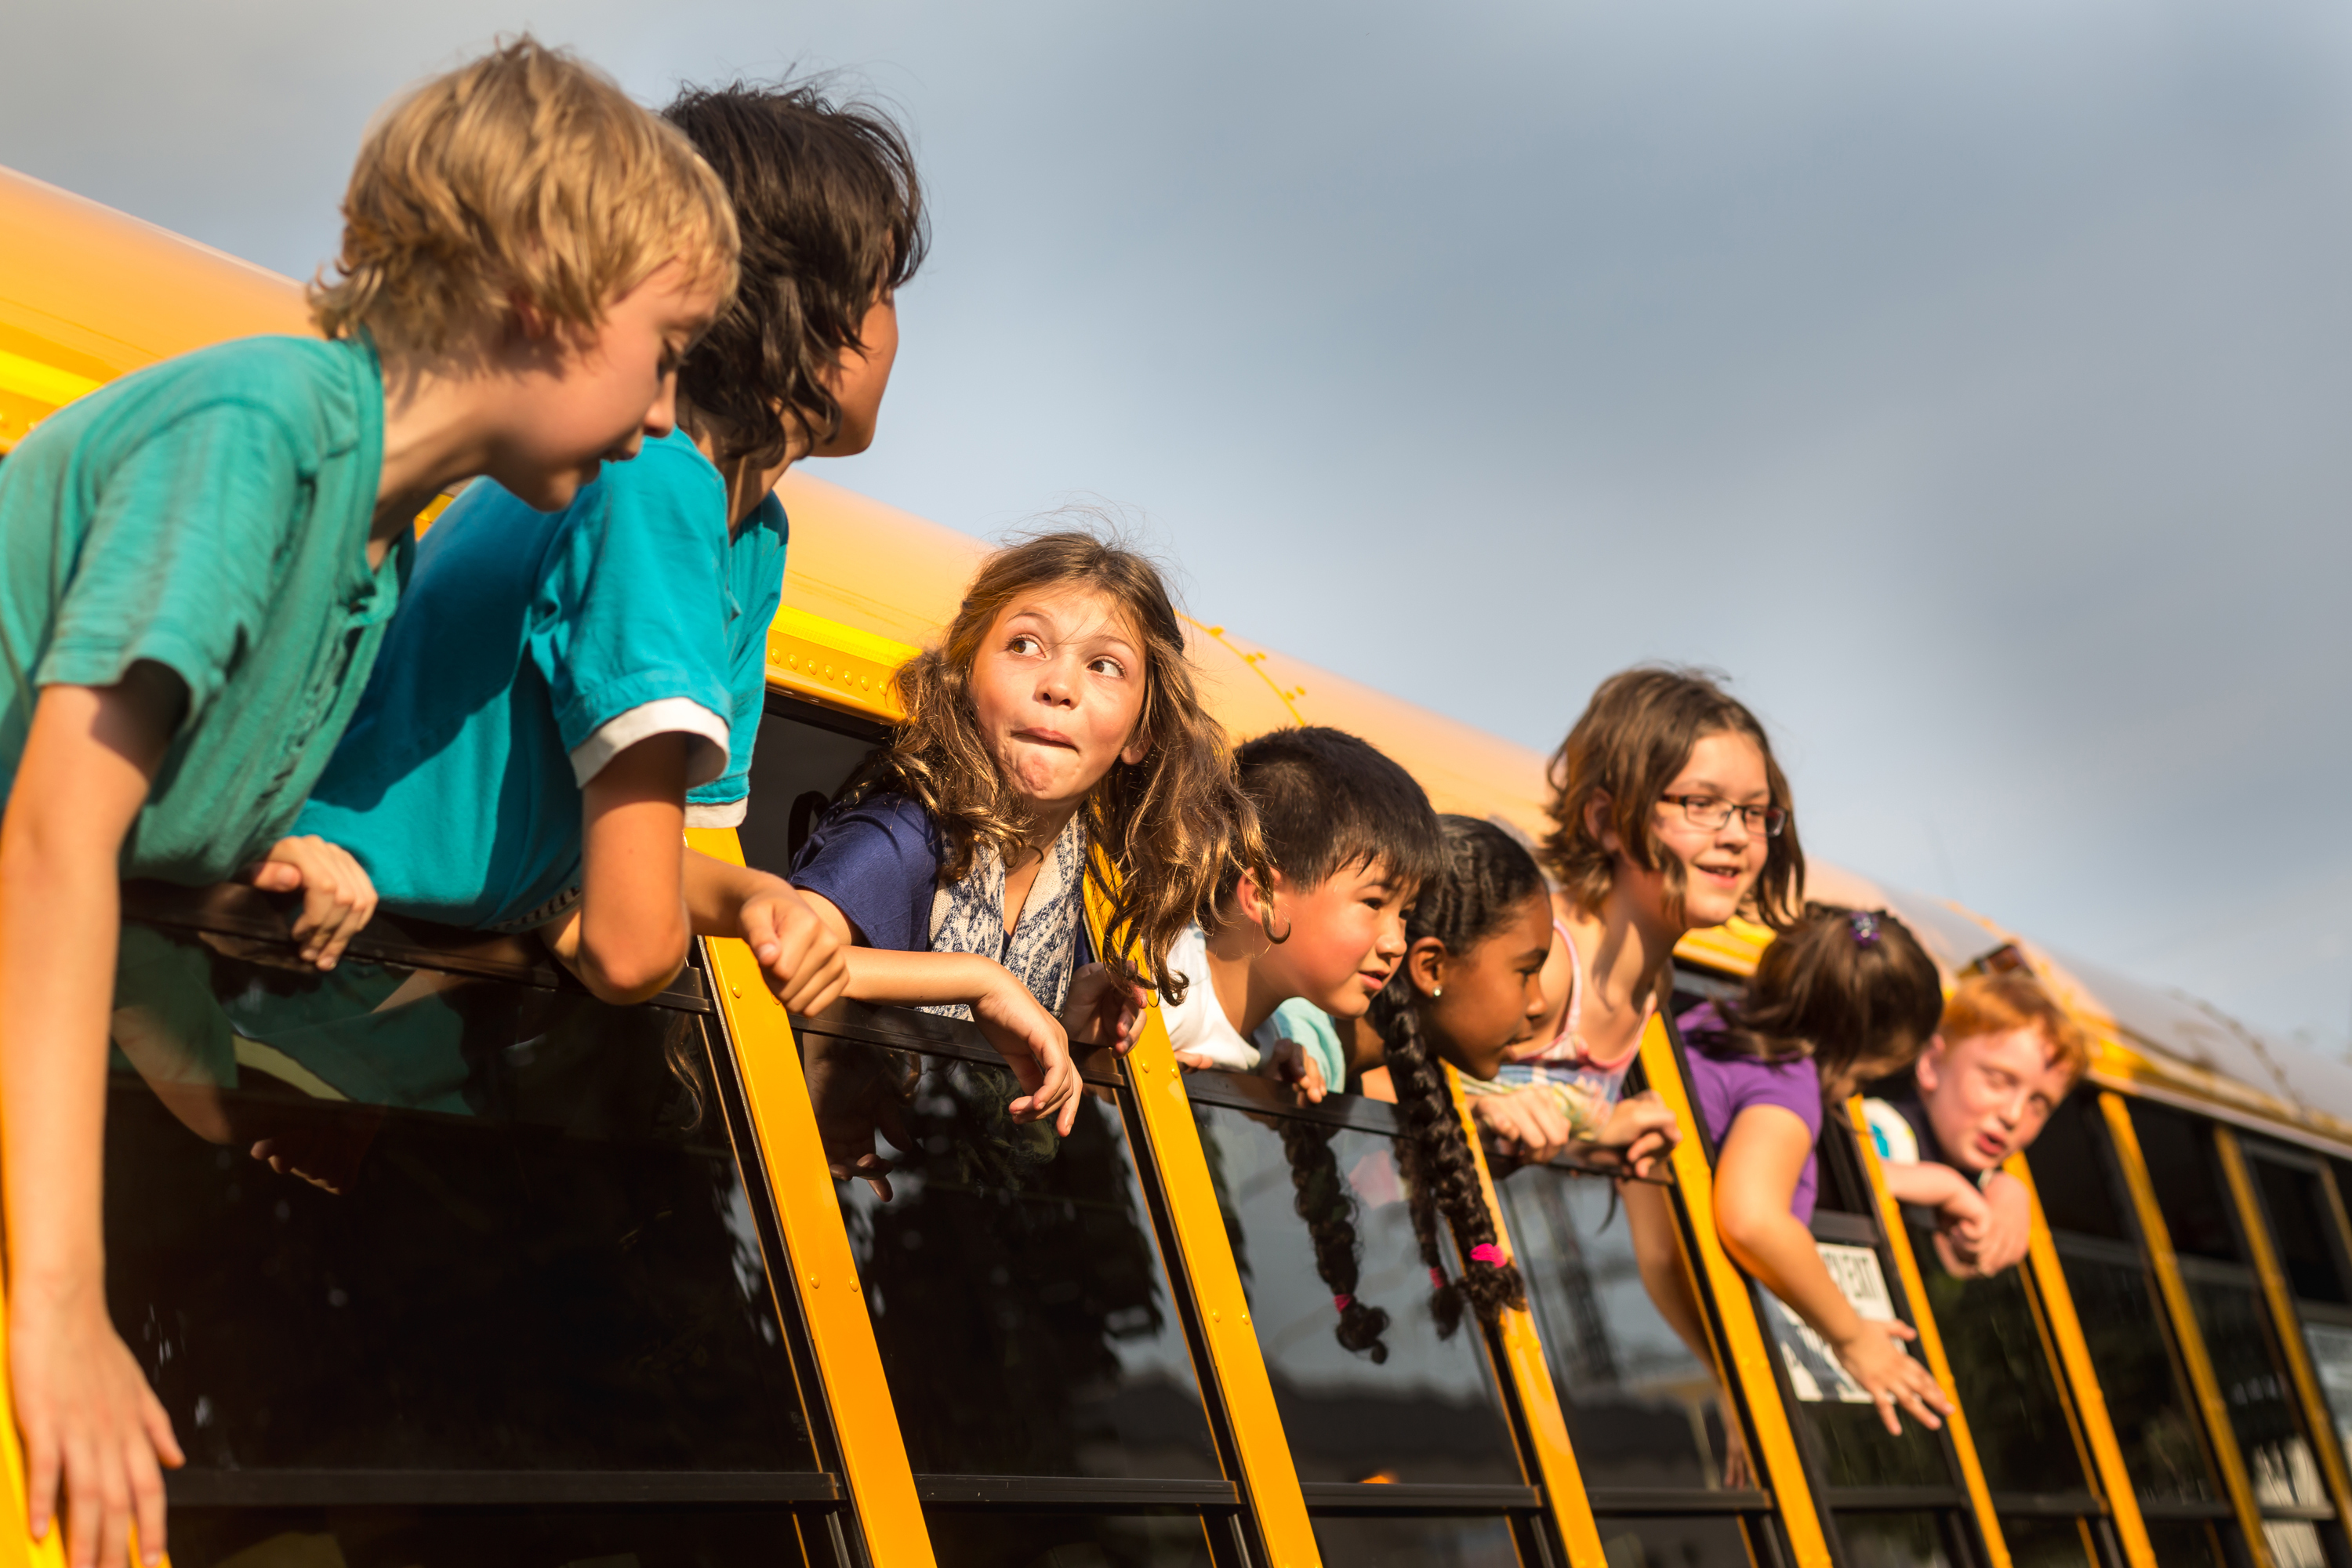 Children on a school bus hanging their heads out the window. SHUTTERSTOCK/ Skyward Kick Productions